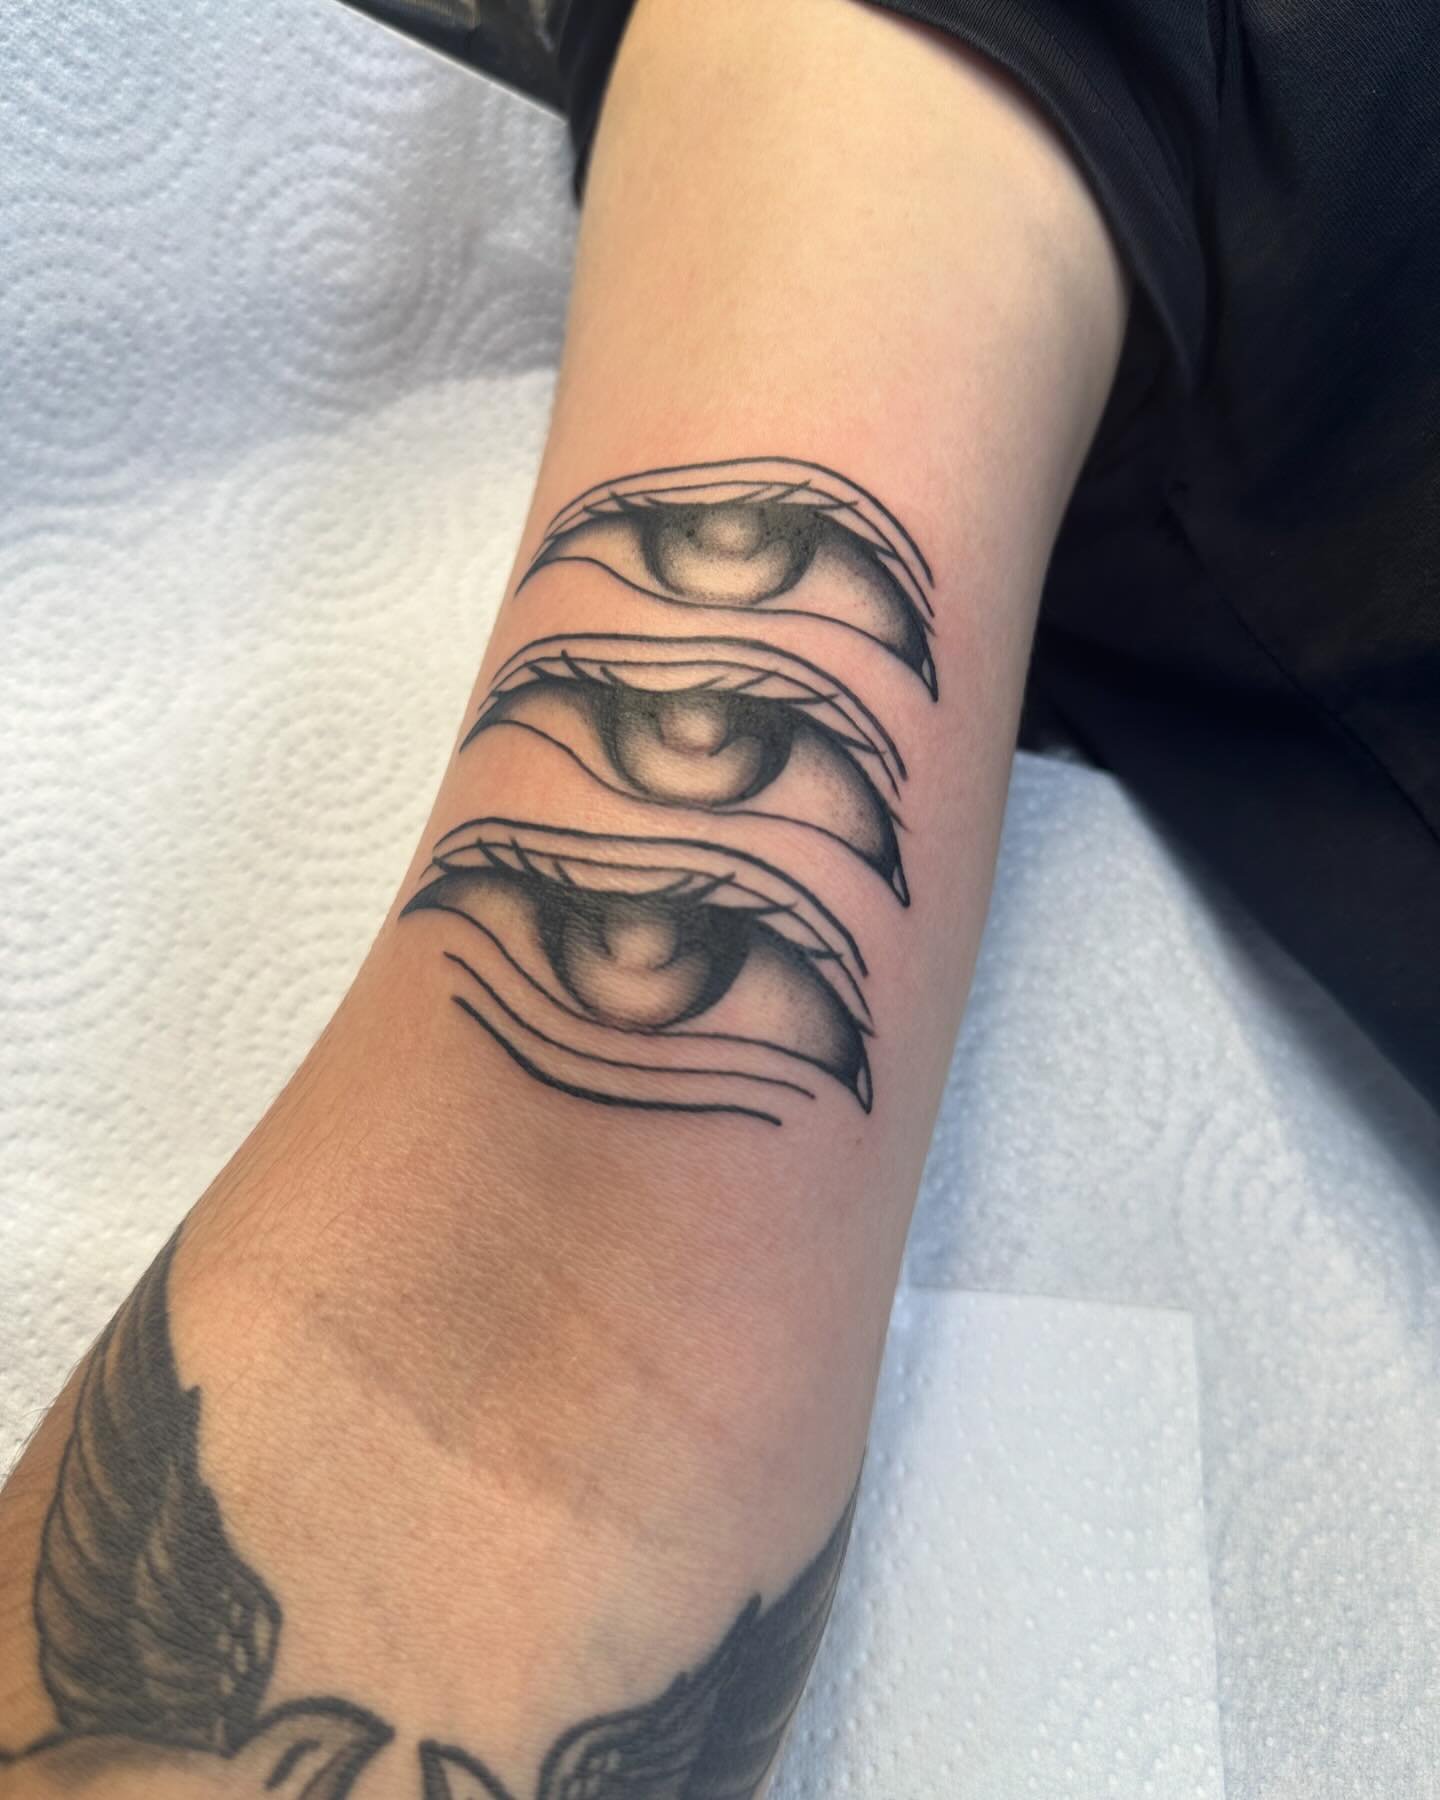 ❤️EYES❤️

Thank you Sinan for the Trust❤️❤️
With Love Chelly❤️
My books are open!!
Dm me if your interested 
Find me @noble_tattoo

.
.
.
.
.
.
.
.
.
.
.
.
.
.
.
.
.
.
.
.
.
.
.
.
.
.
.
.
.
.
.
.
.
.
.
.
#tattoo #traditionaltattoo #customtattoo #trad